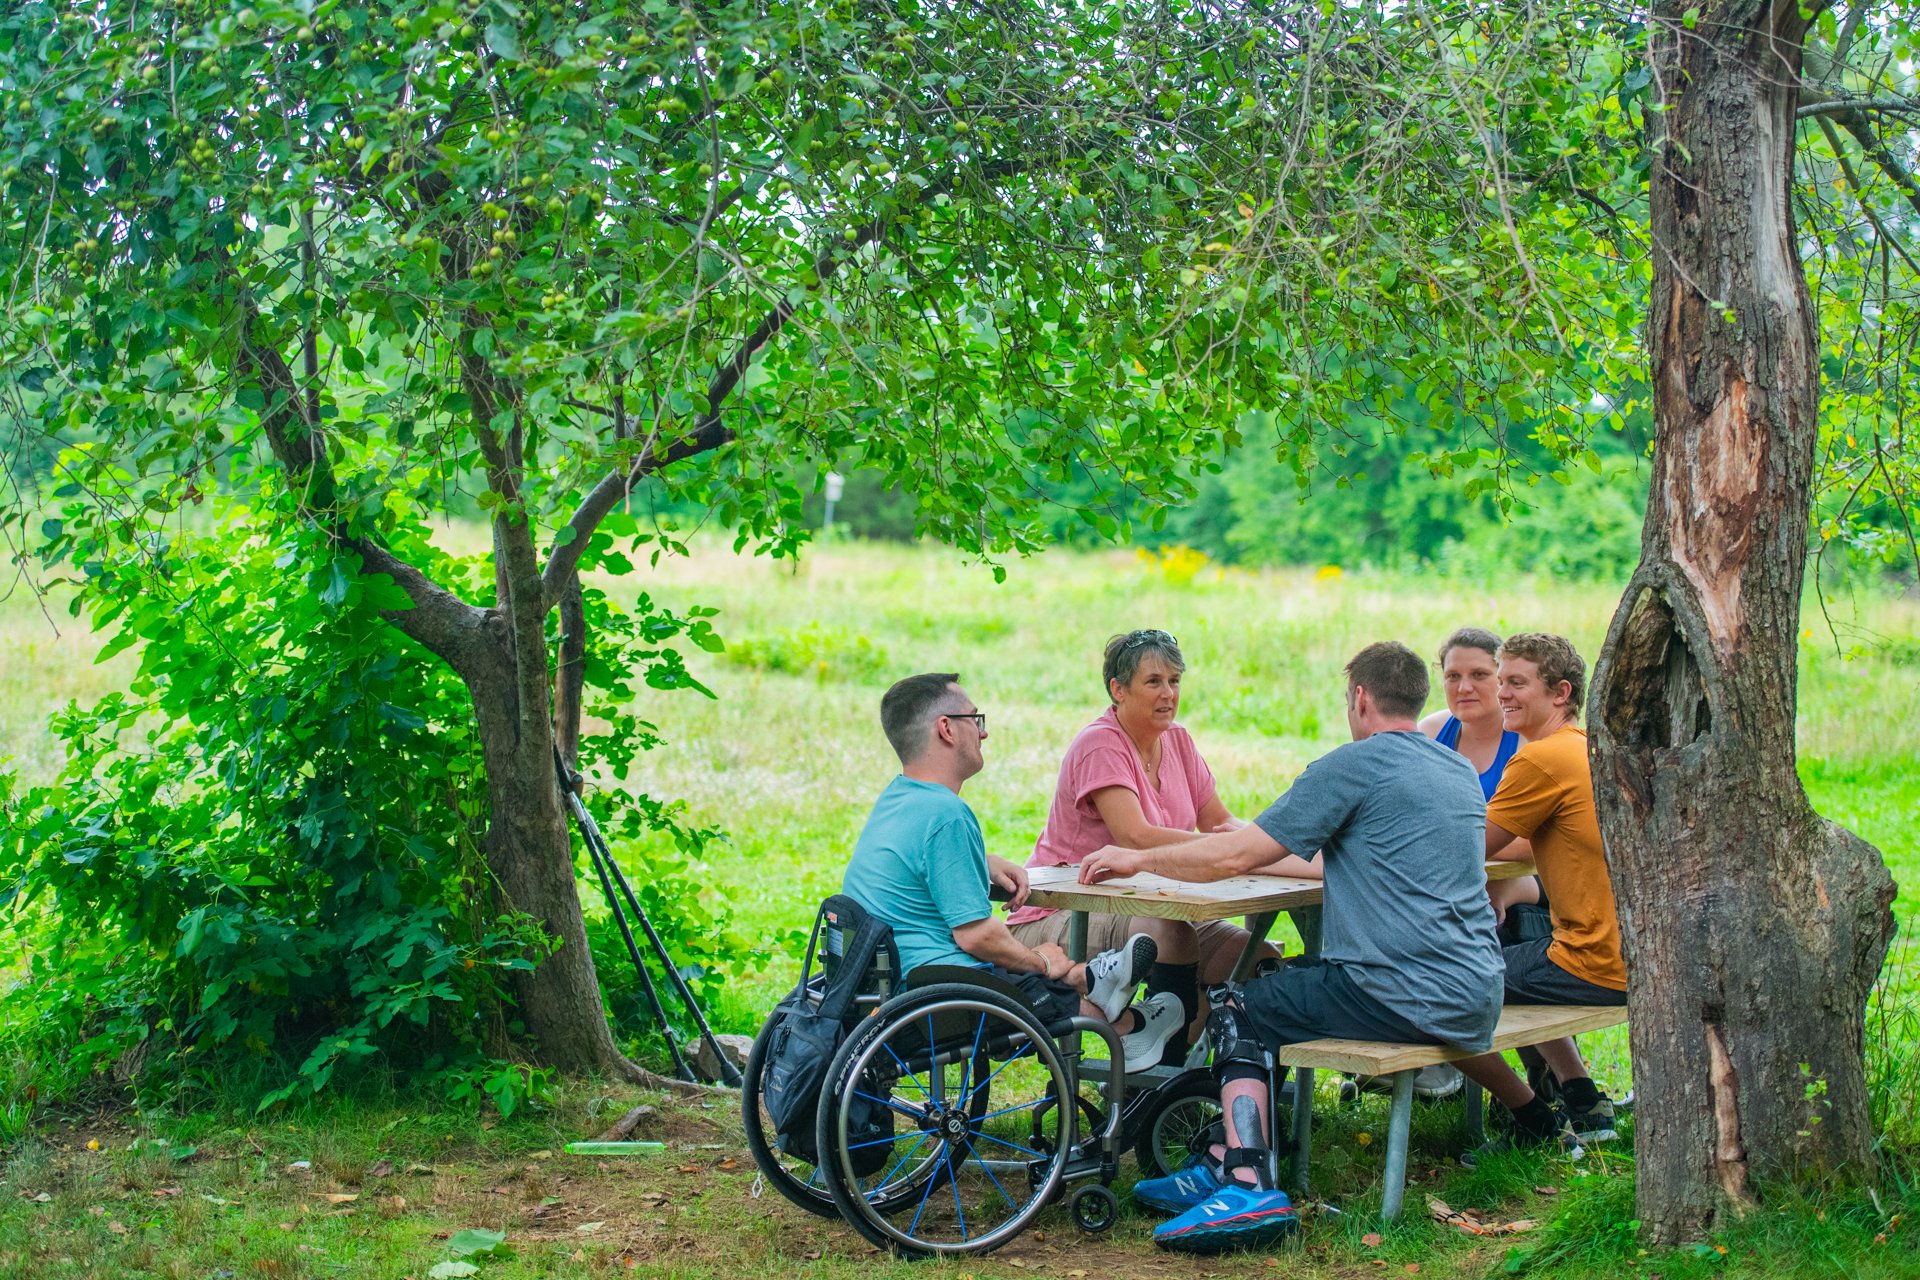 A group of five people, including one wheelchair user, are seated at an accessible picnic table beneath a tree, talking and smiling